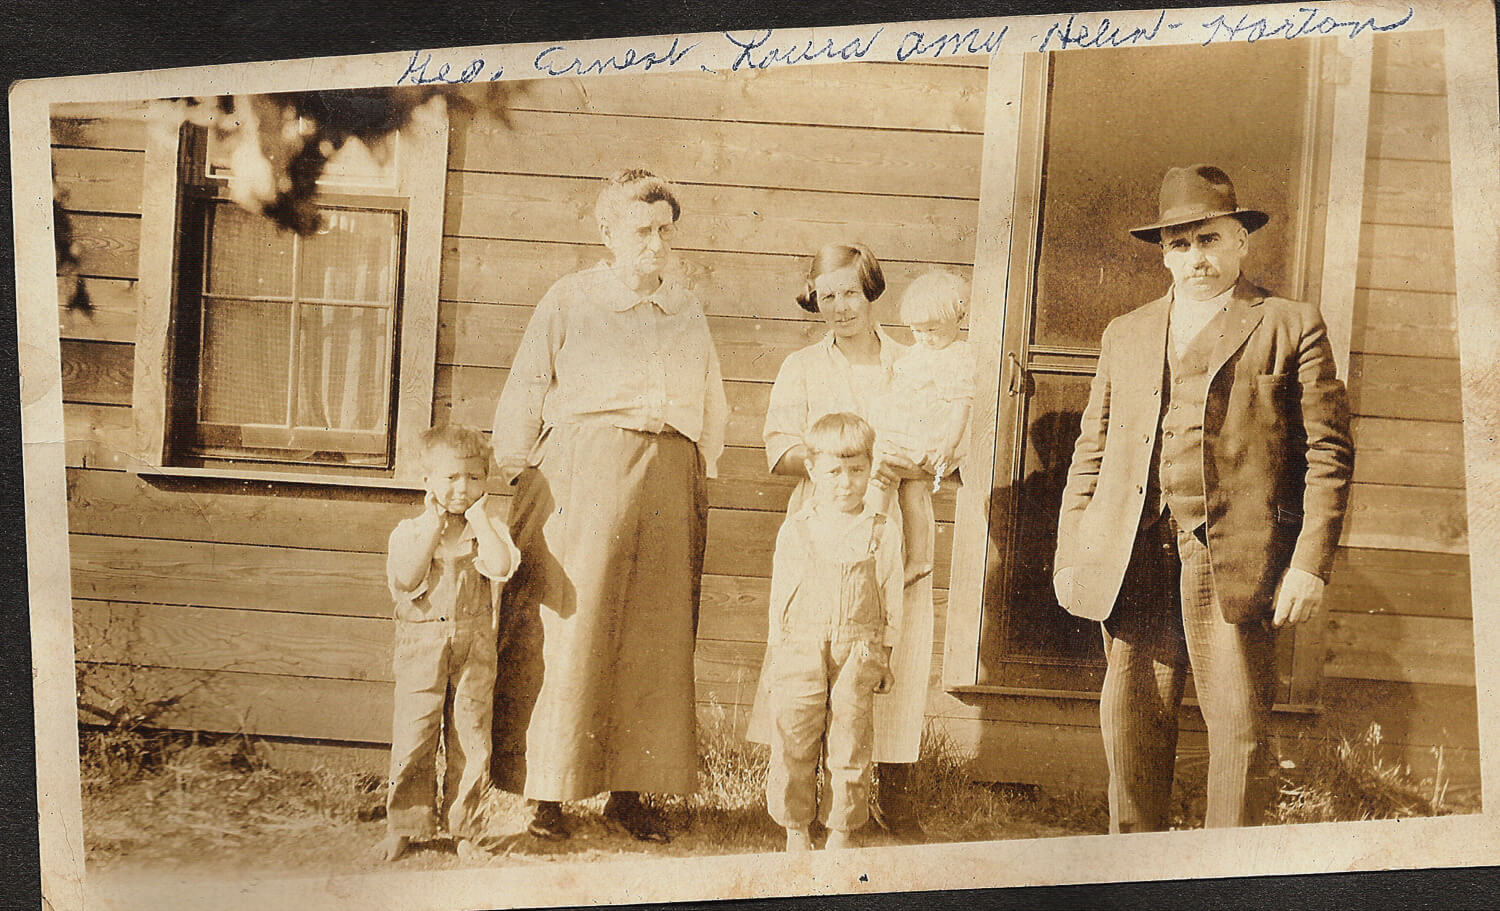 Archive photograph in sepia tone of two adults, with 4 children in front of a house.